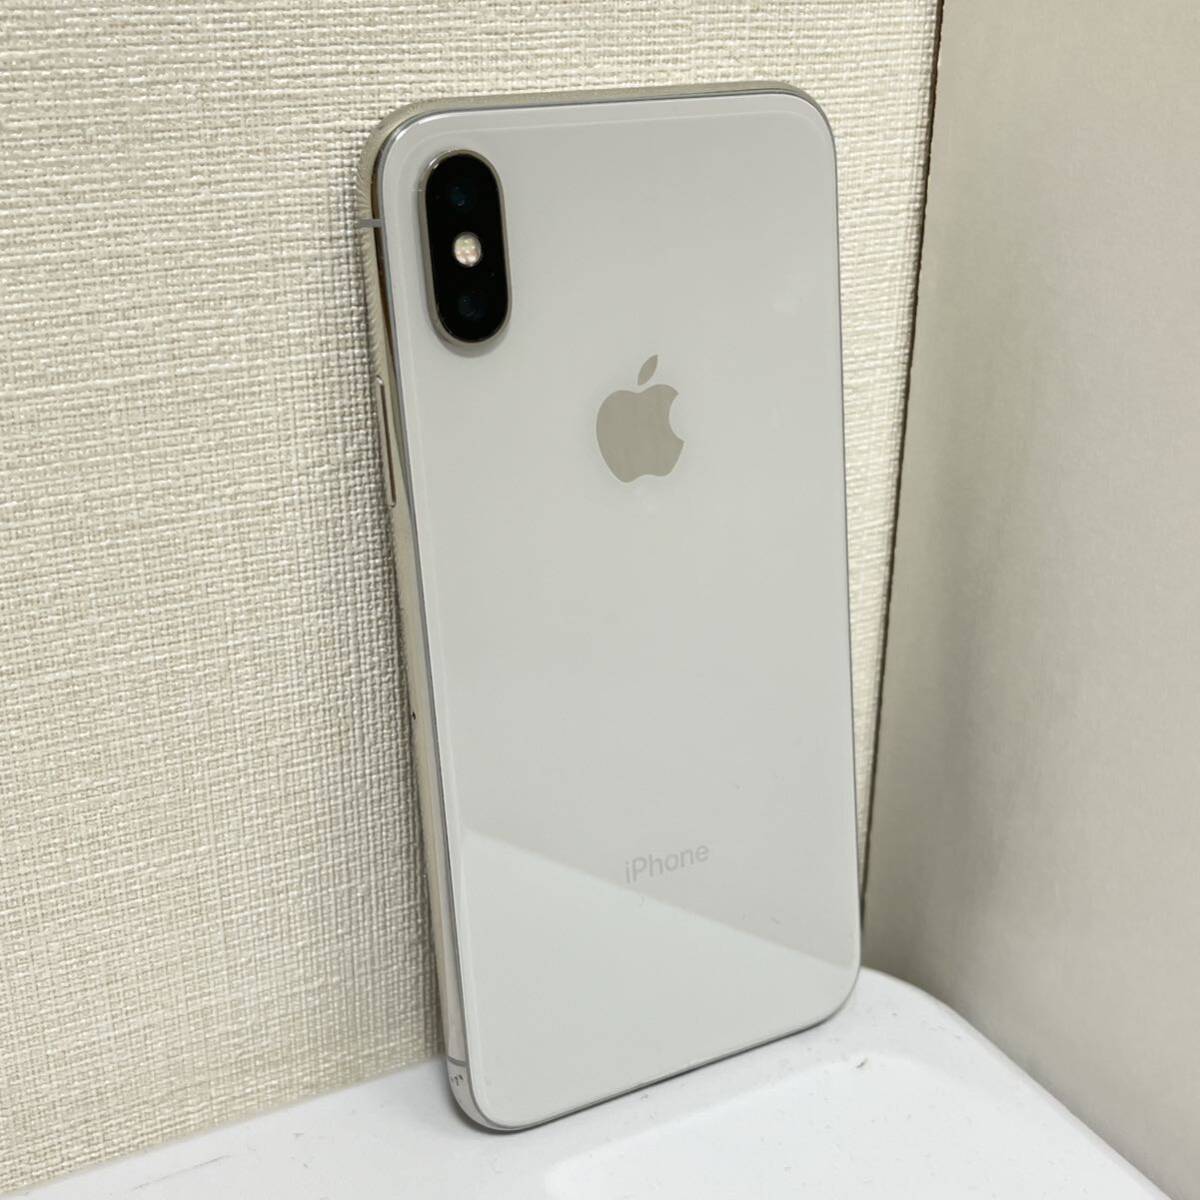 **1 jpy start ** free shipping ** iPhone X 64GB used smartphone smart phone body SIM lock have silver 